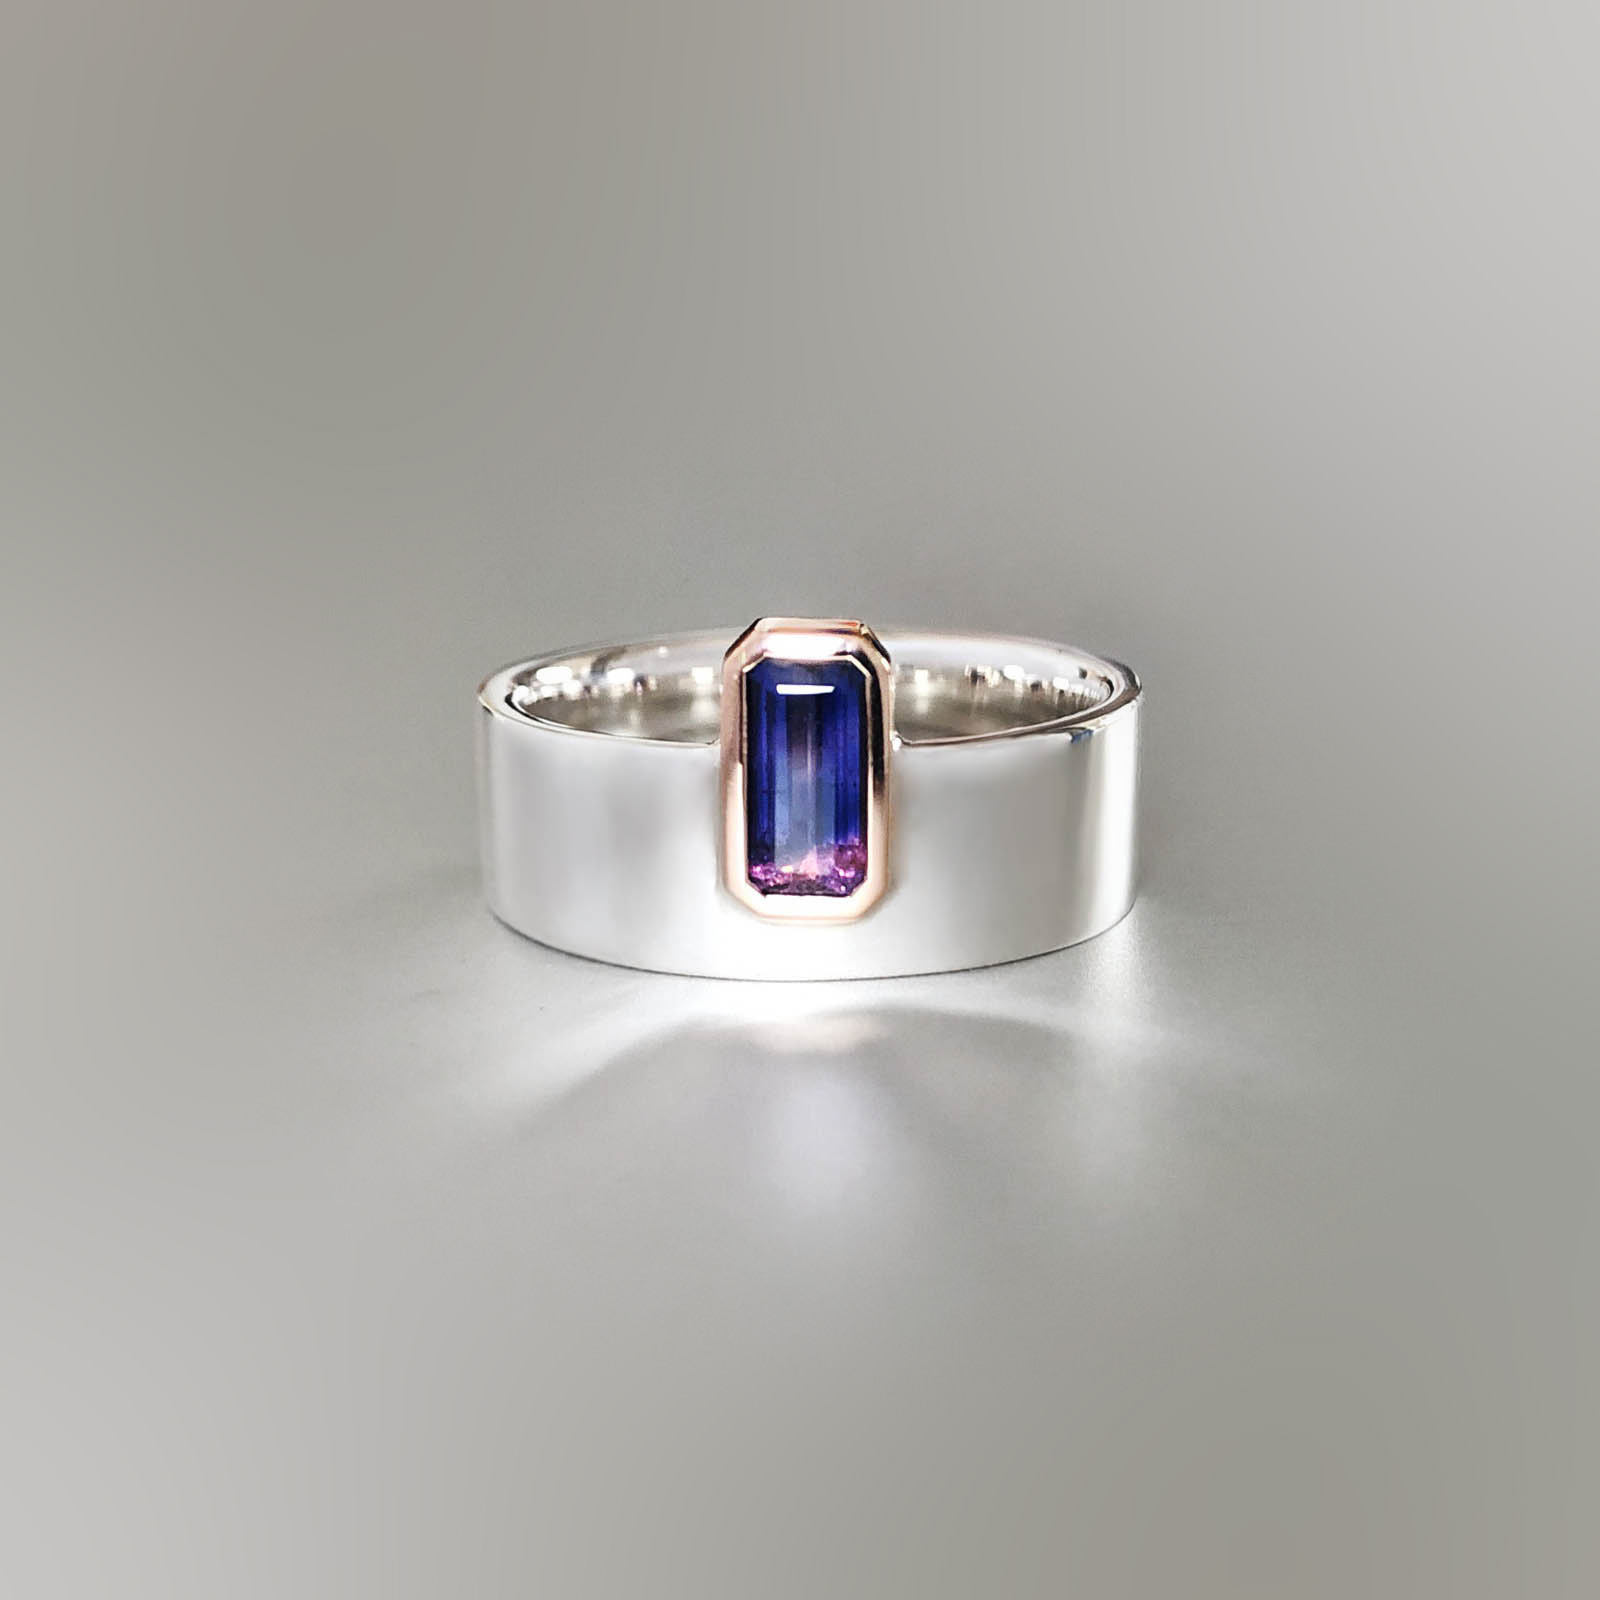 Tanzanian sapphire ring in rose gold and palladium-based sterling silver